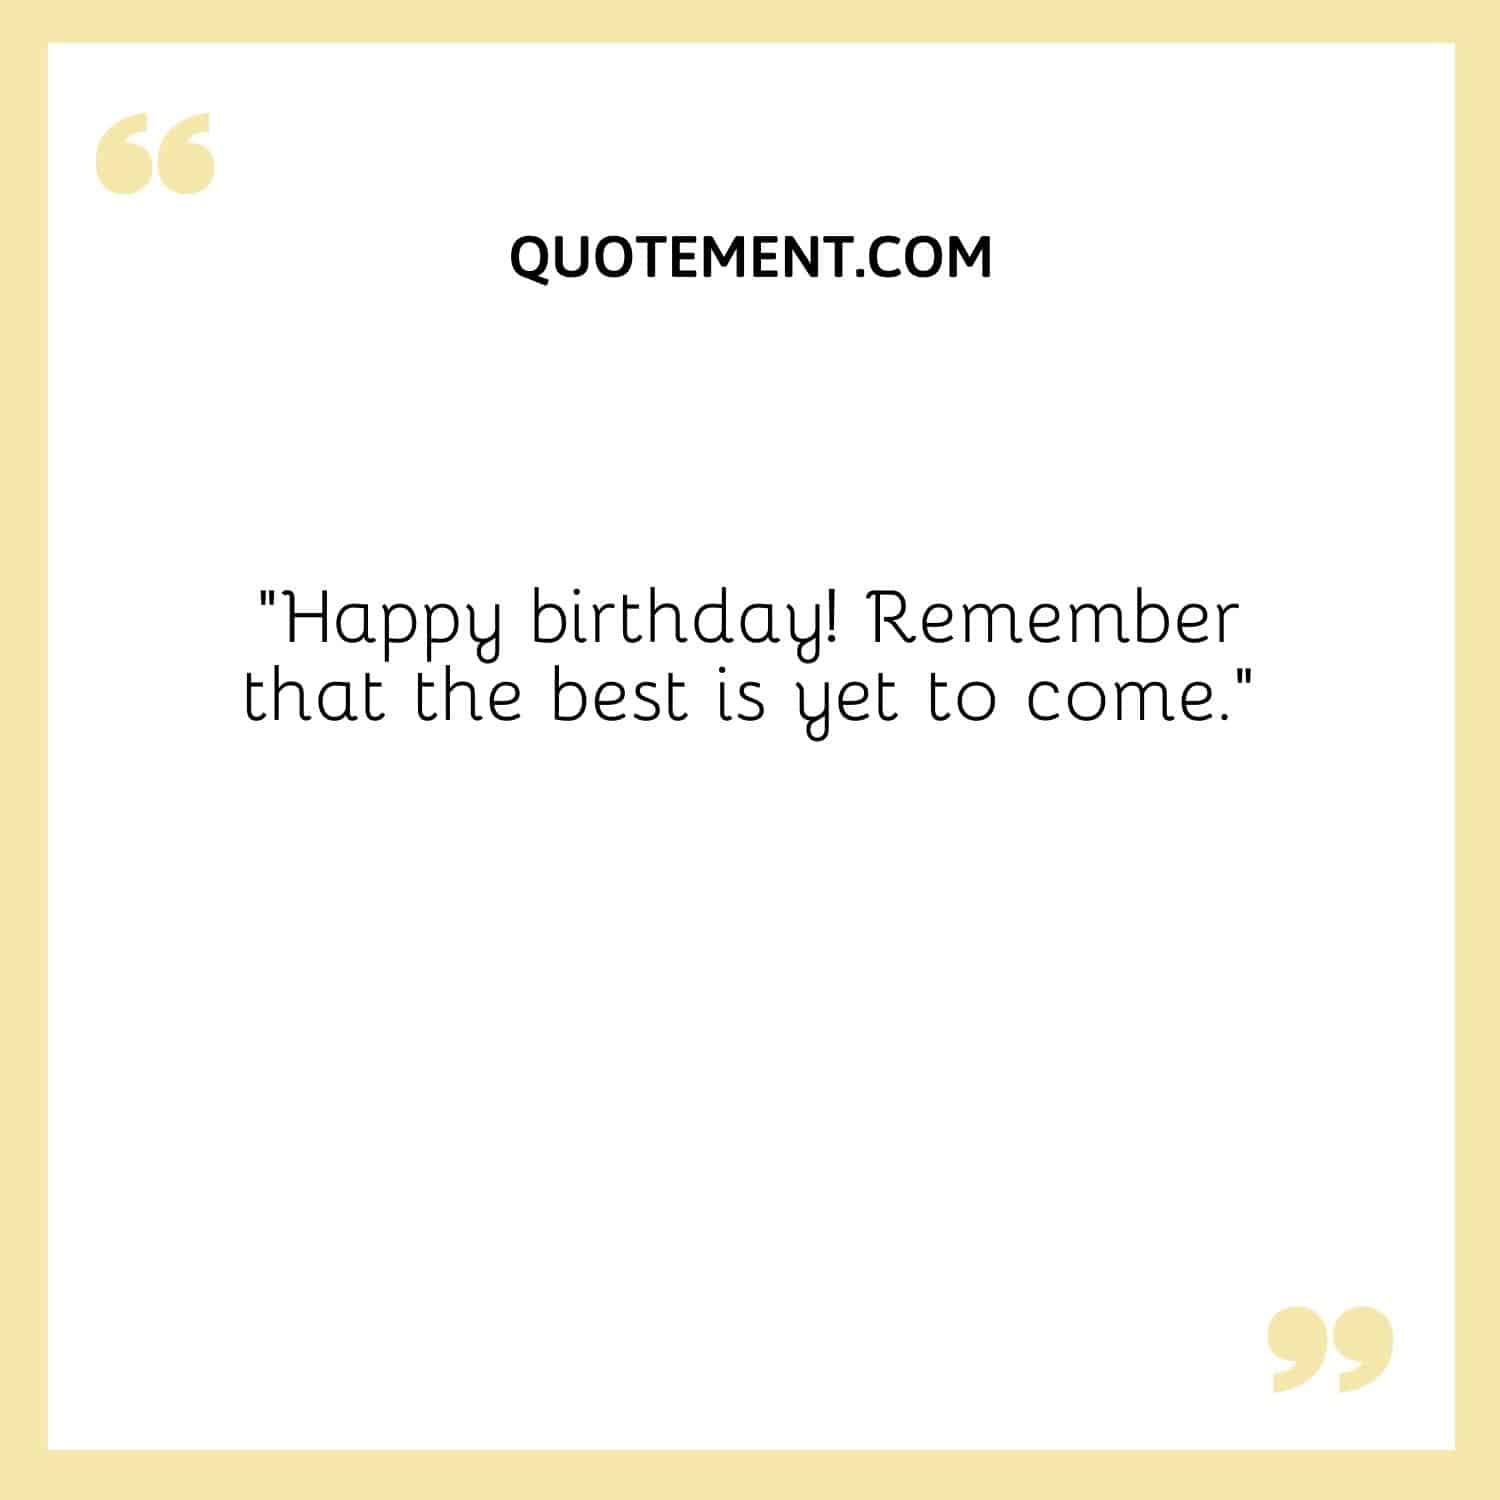 “Happy birthday! Remember that the best is yet to come.”